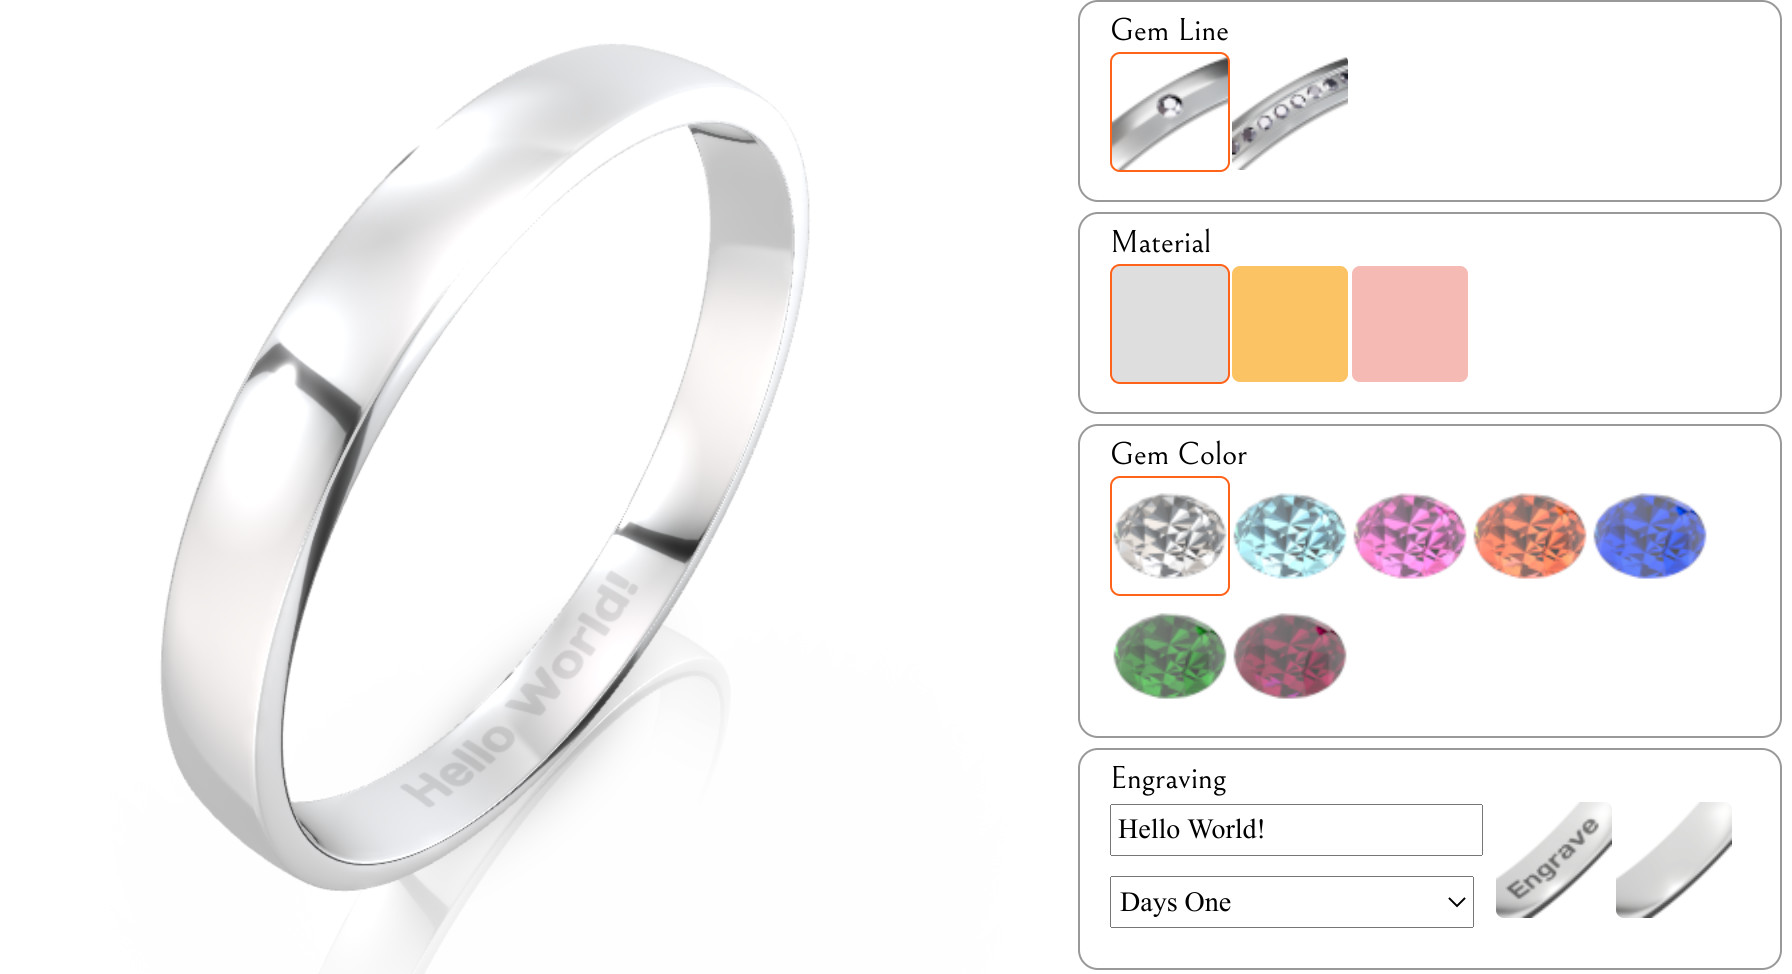 Engraving in the Jewelry Configurator demo